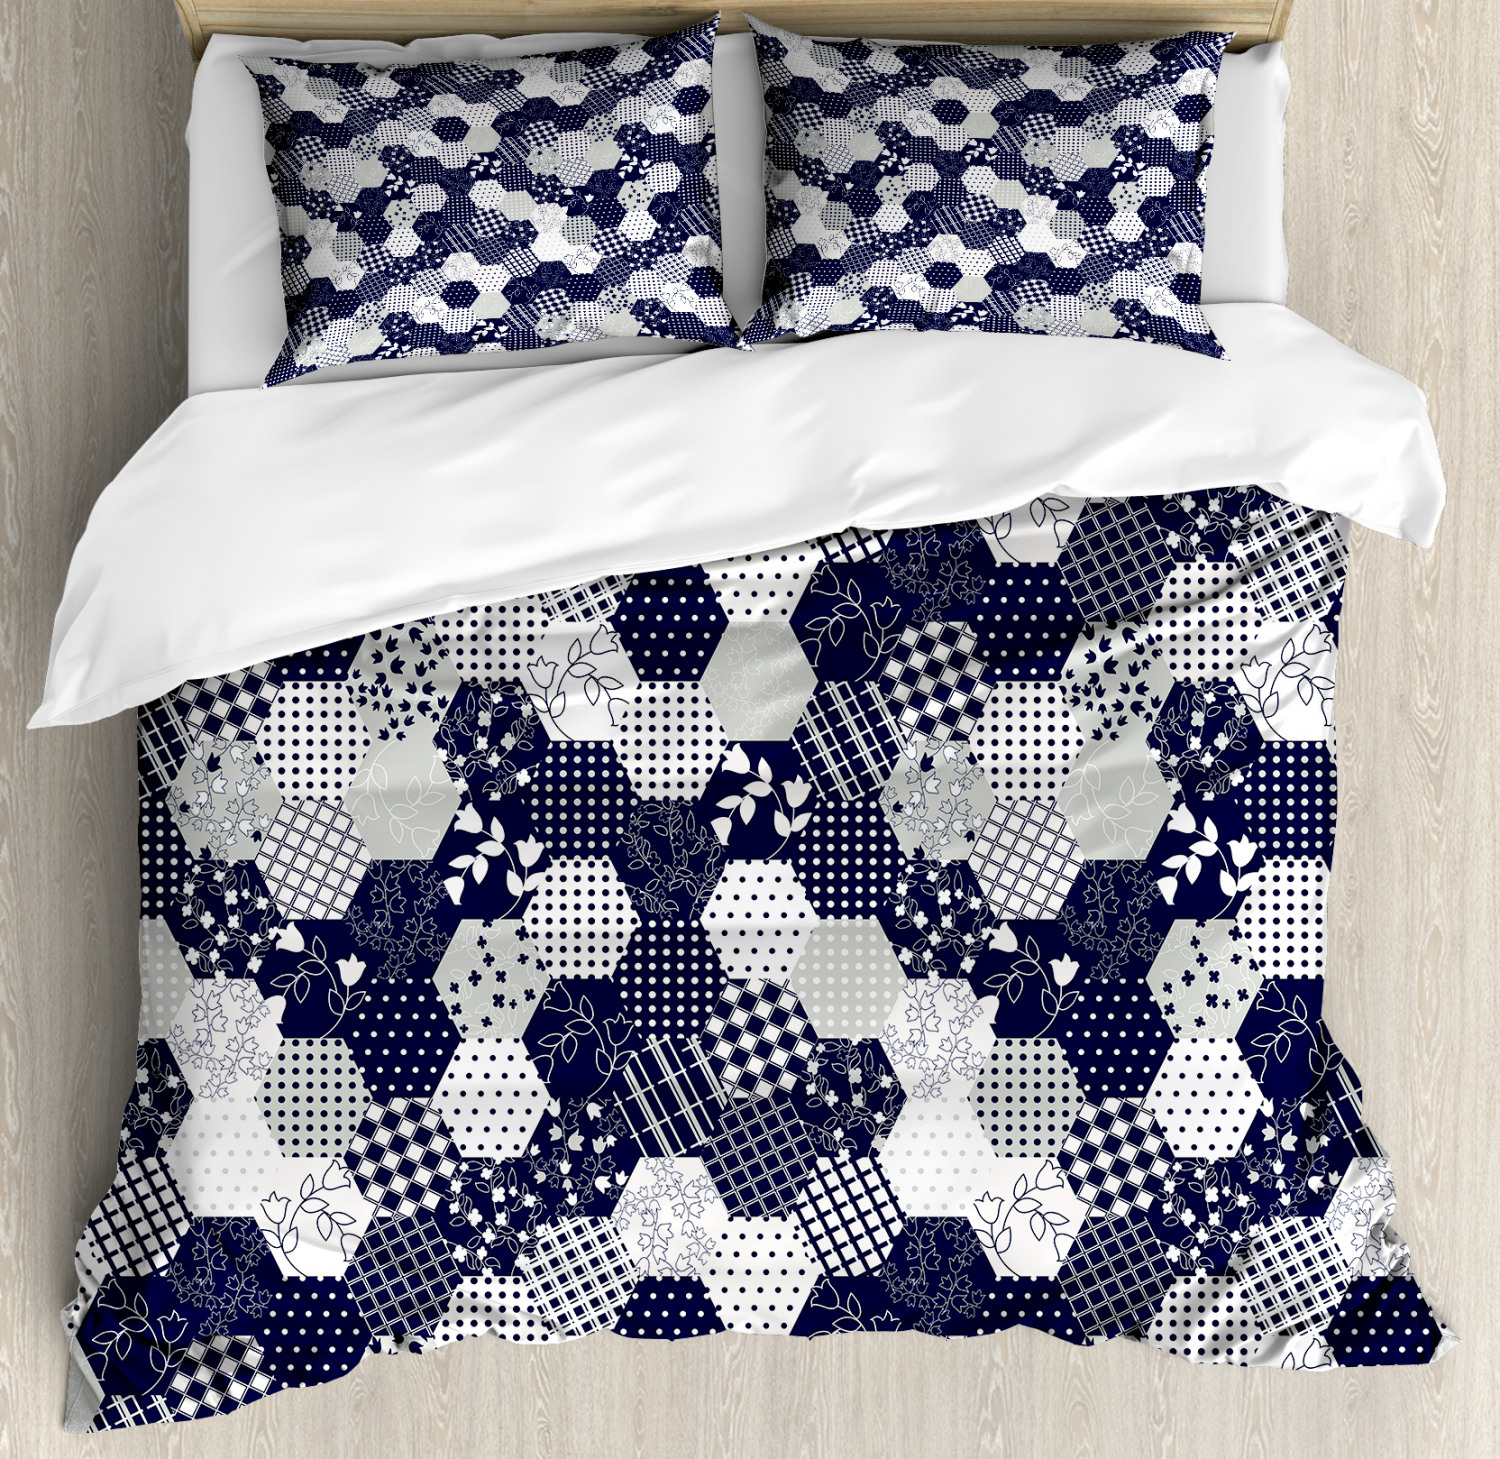 Navy Duvet Cover Set With Pillow Shams Patchwork Style Dots Star